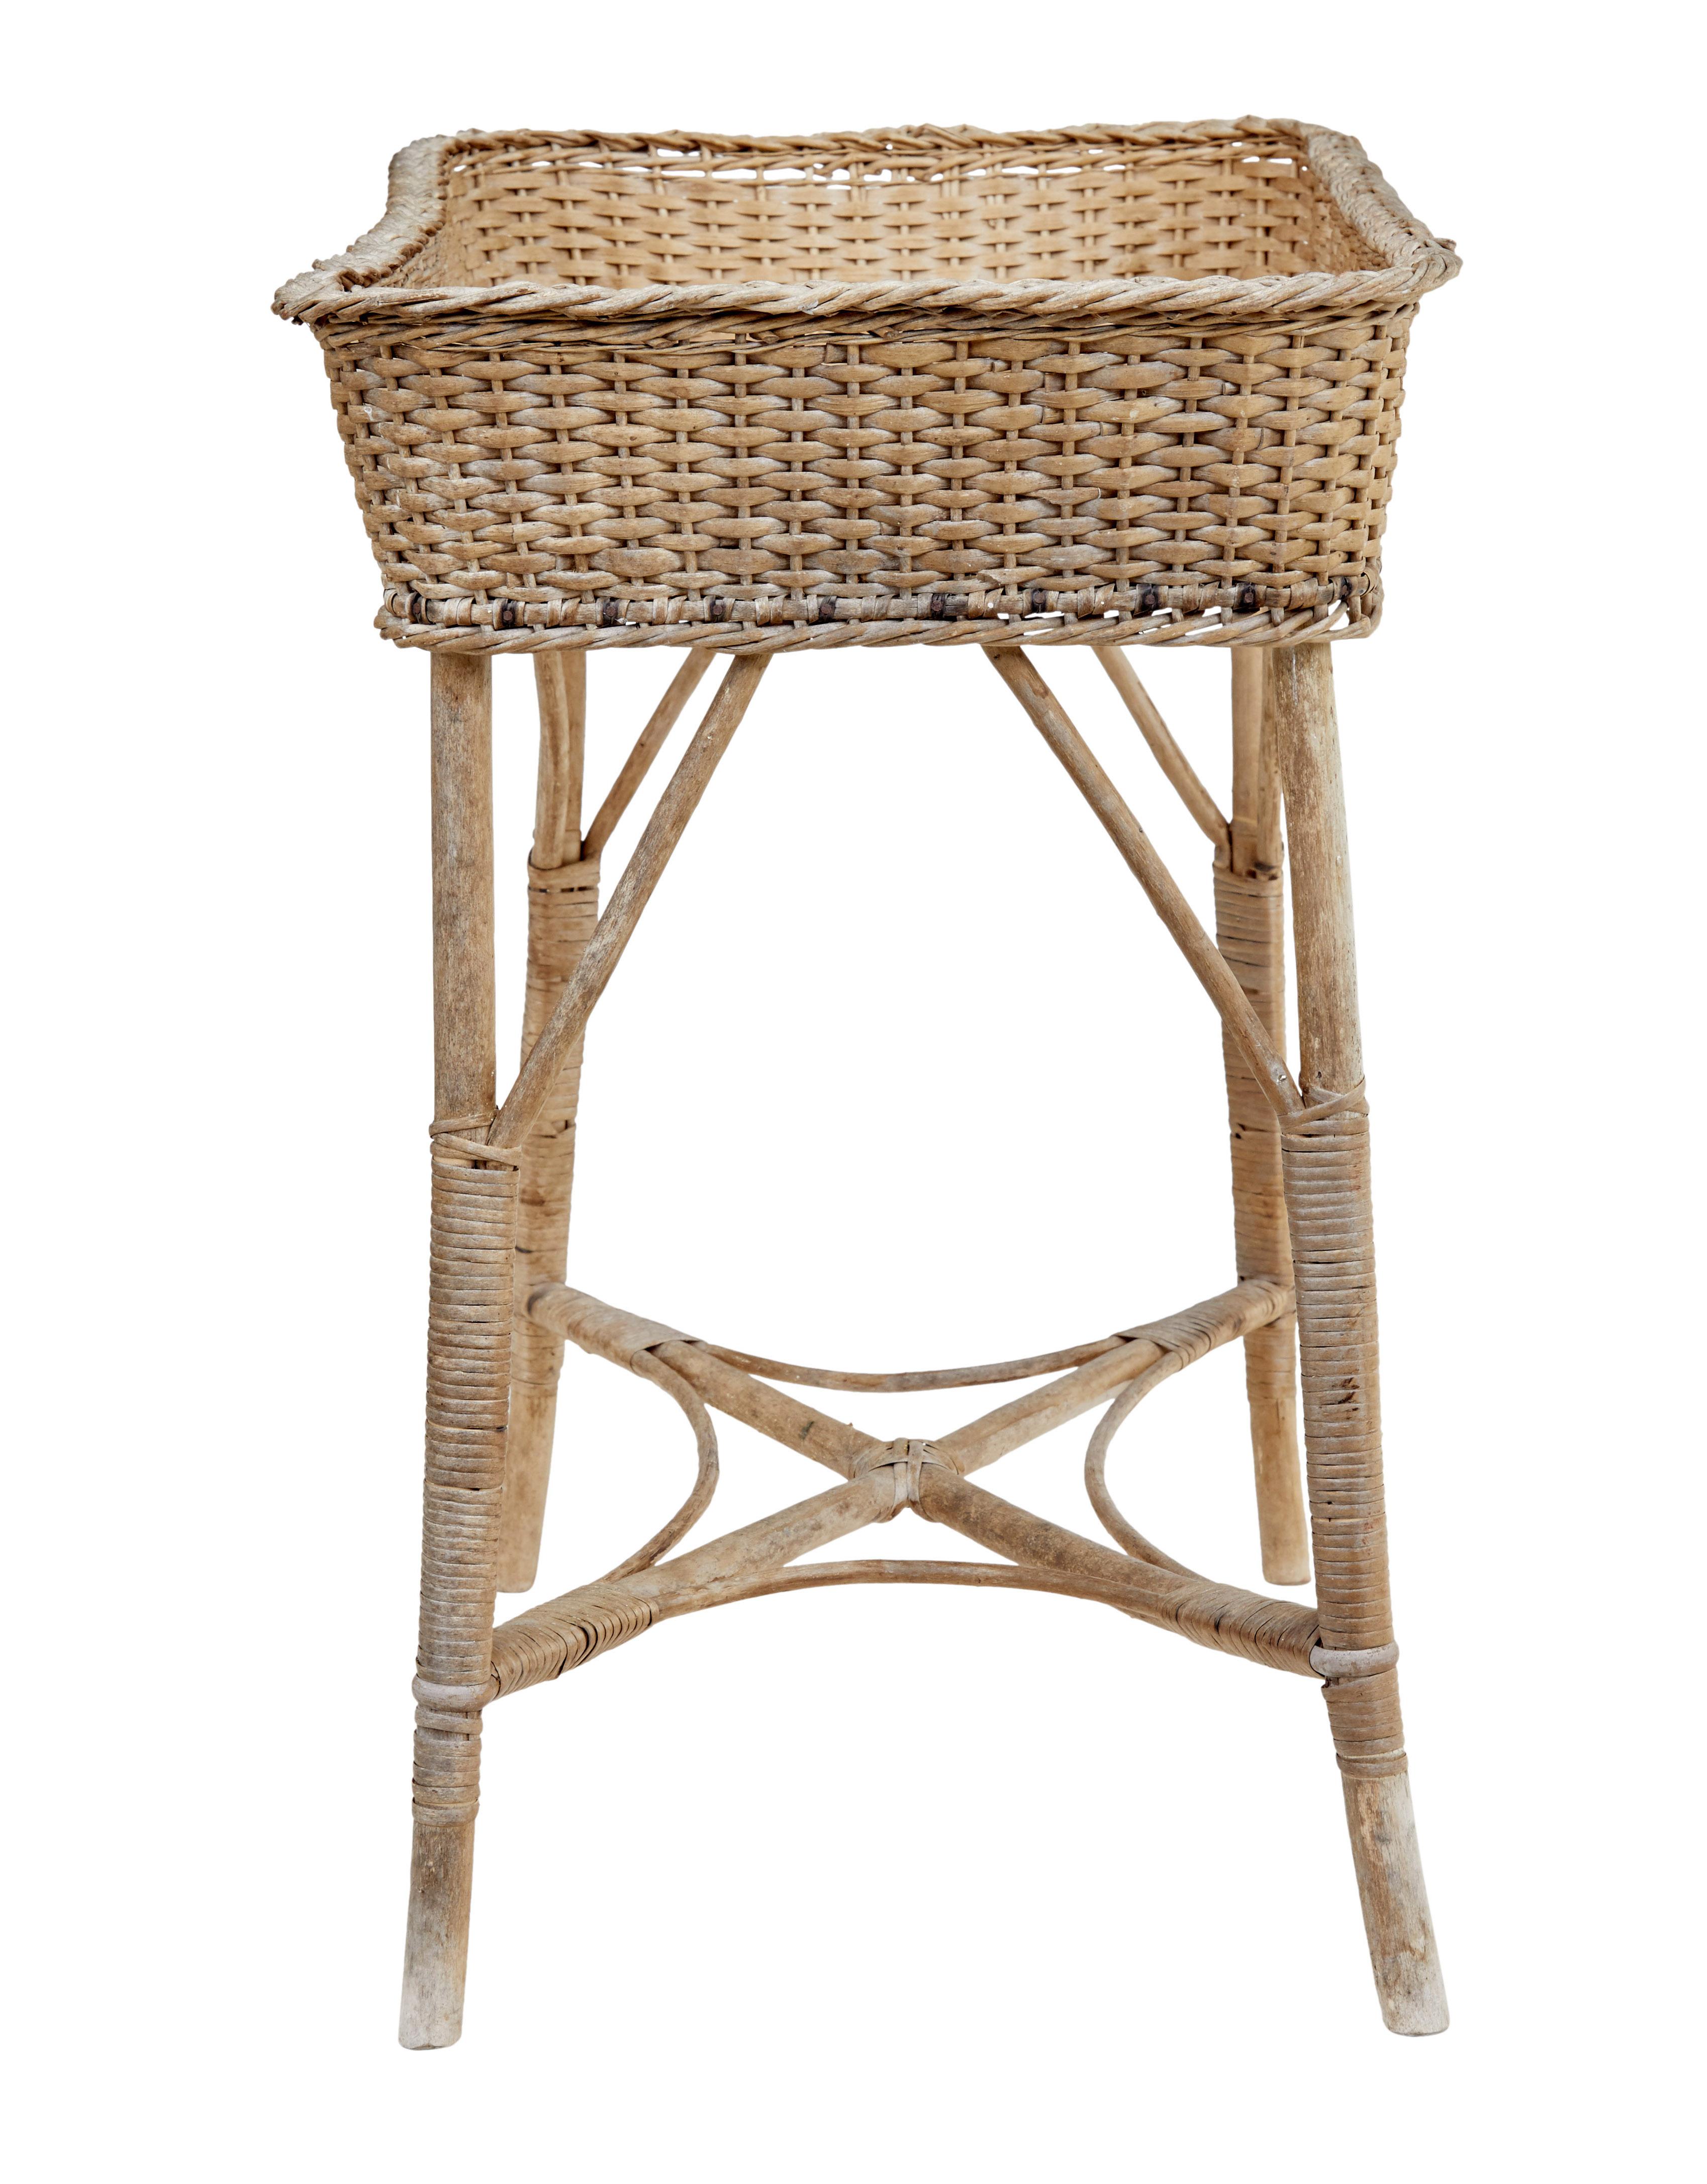 Rustic Early 20th Century Woven Cane Work Jardinière Stand